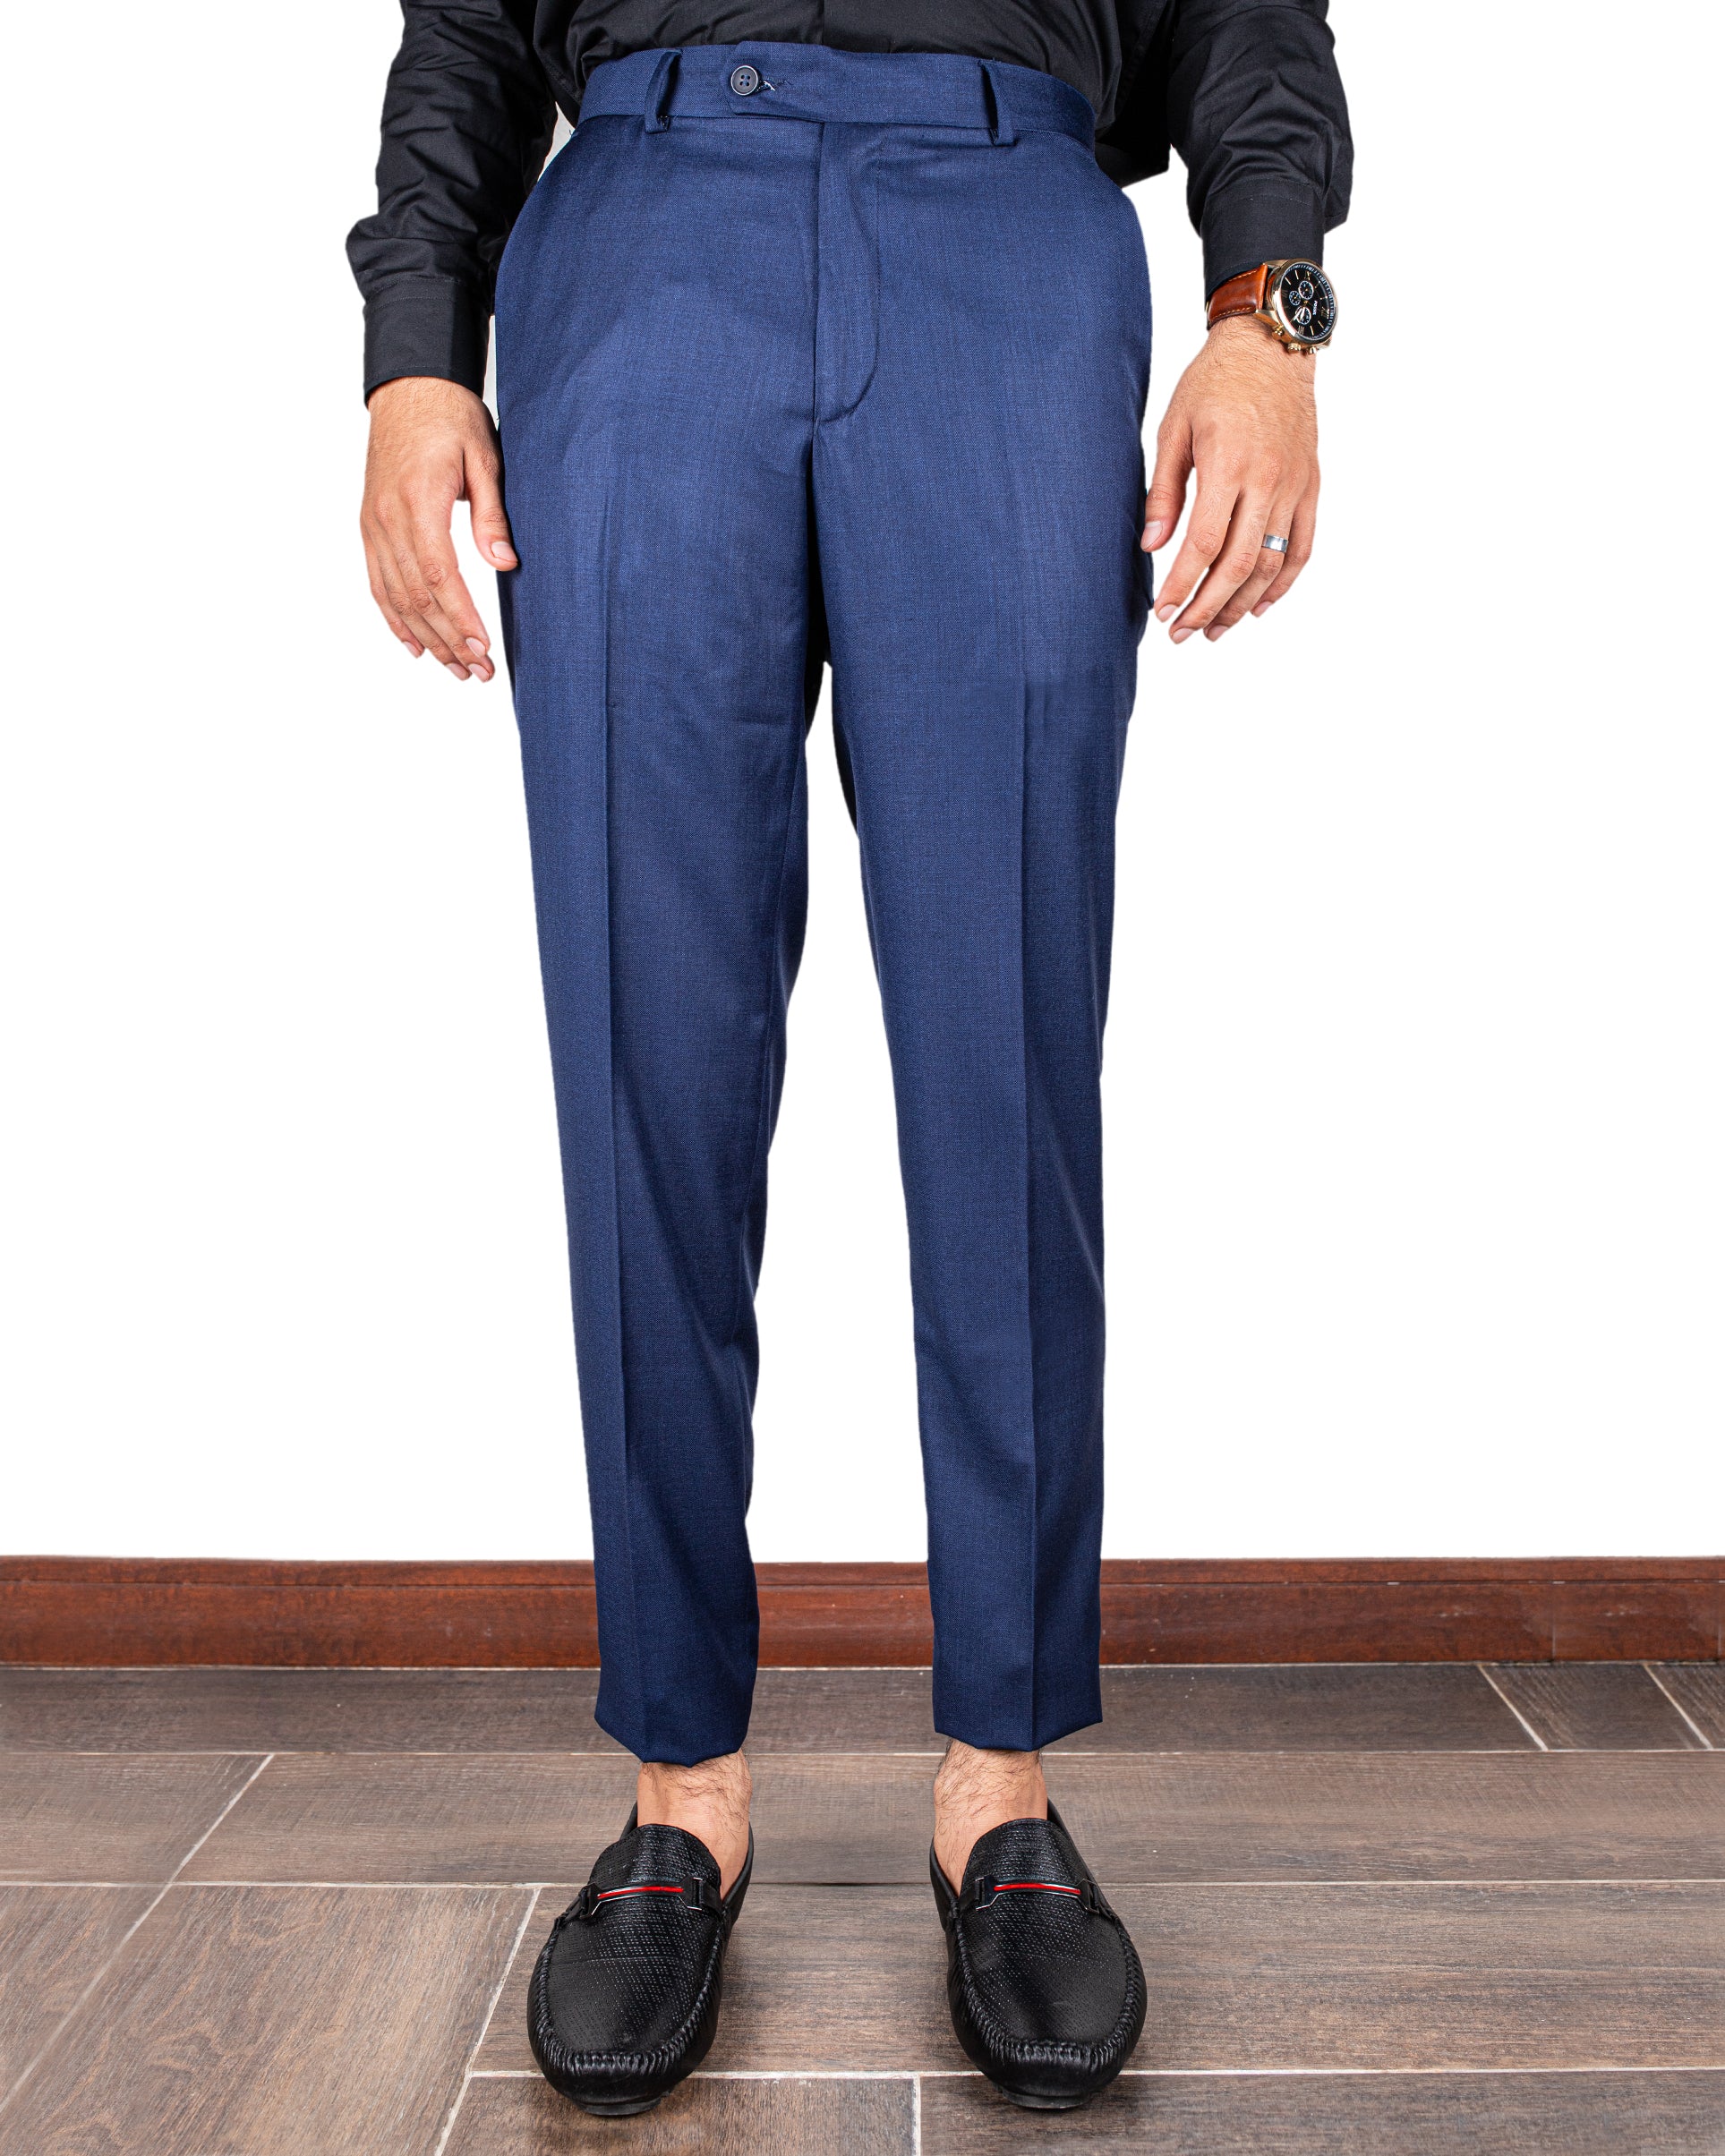 Buy Cliths Navy Blue Formal Pants for Men Slim Fit/Flat Front Fromal  Trousers for Men Cotton at Amazon.in